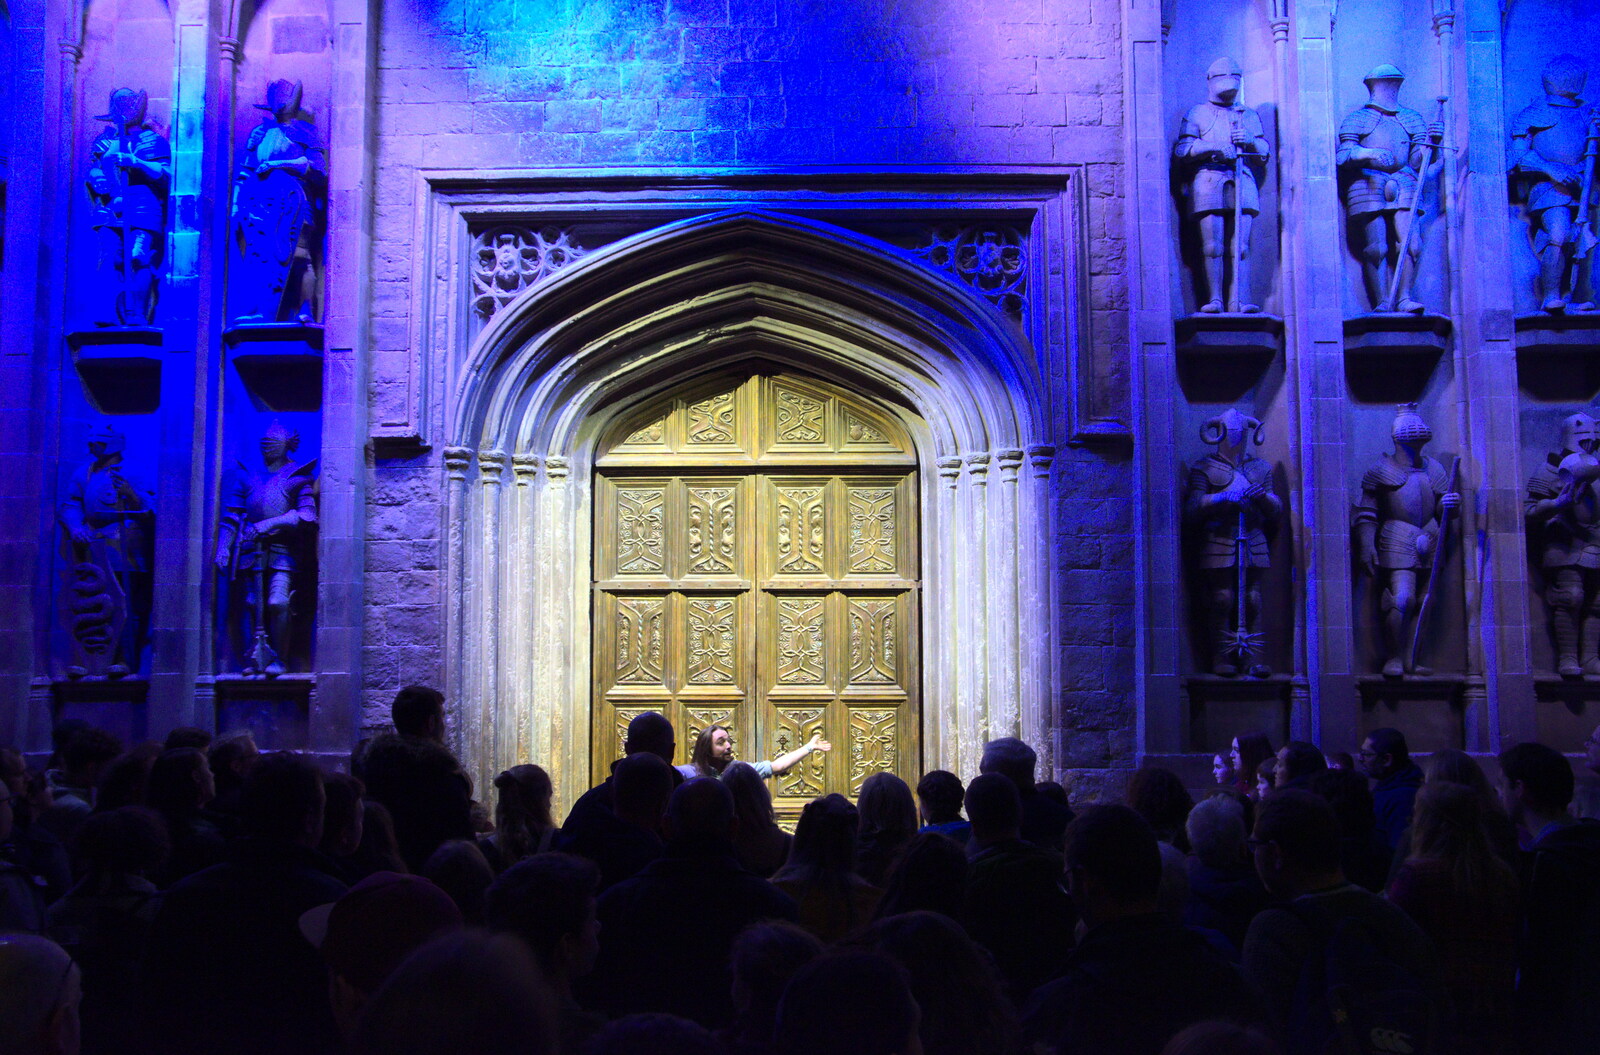 The entrance to the great hall from A Trip to Harry Potter World, Leavesden, Hertfordshire - 16th February 2020